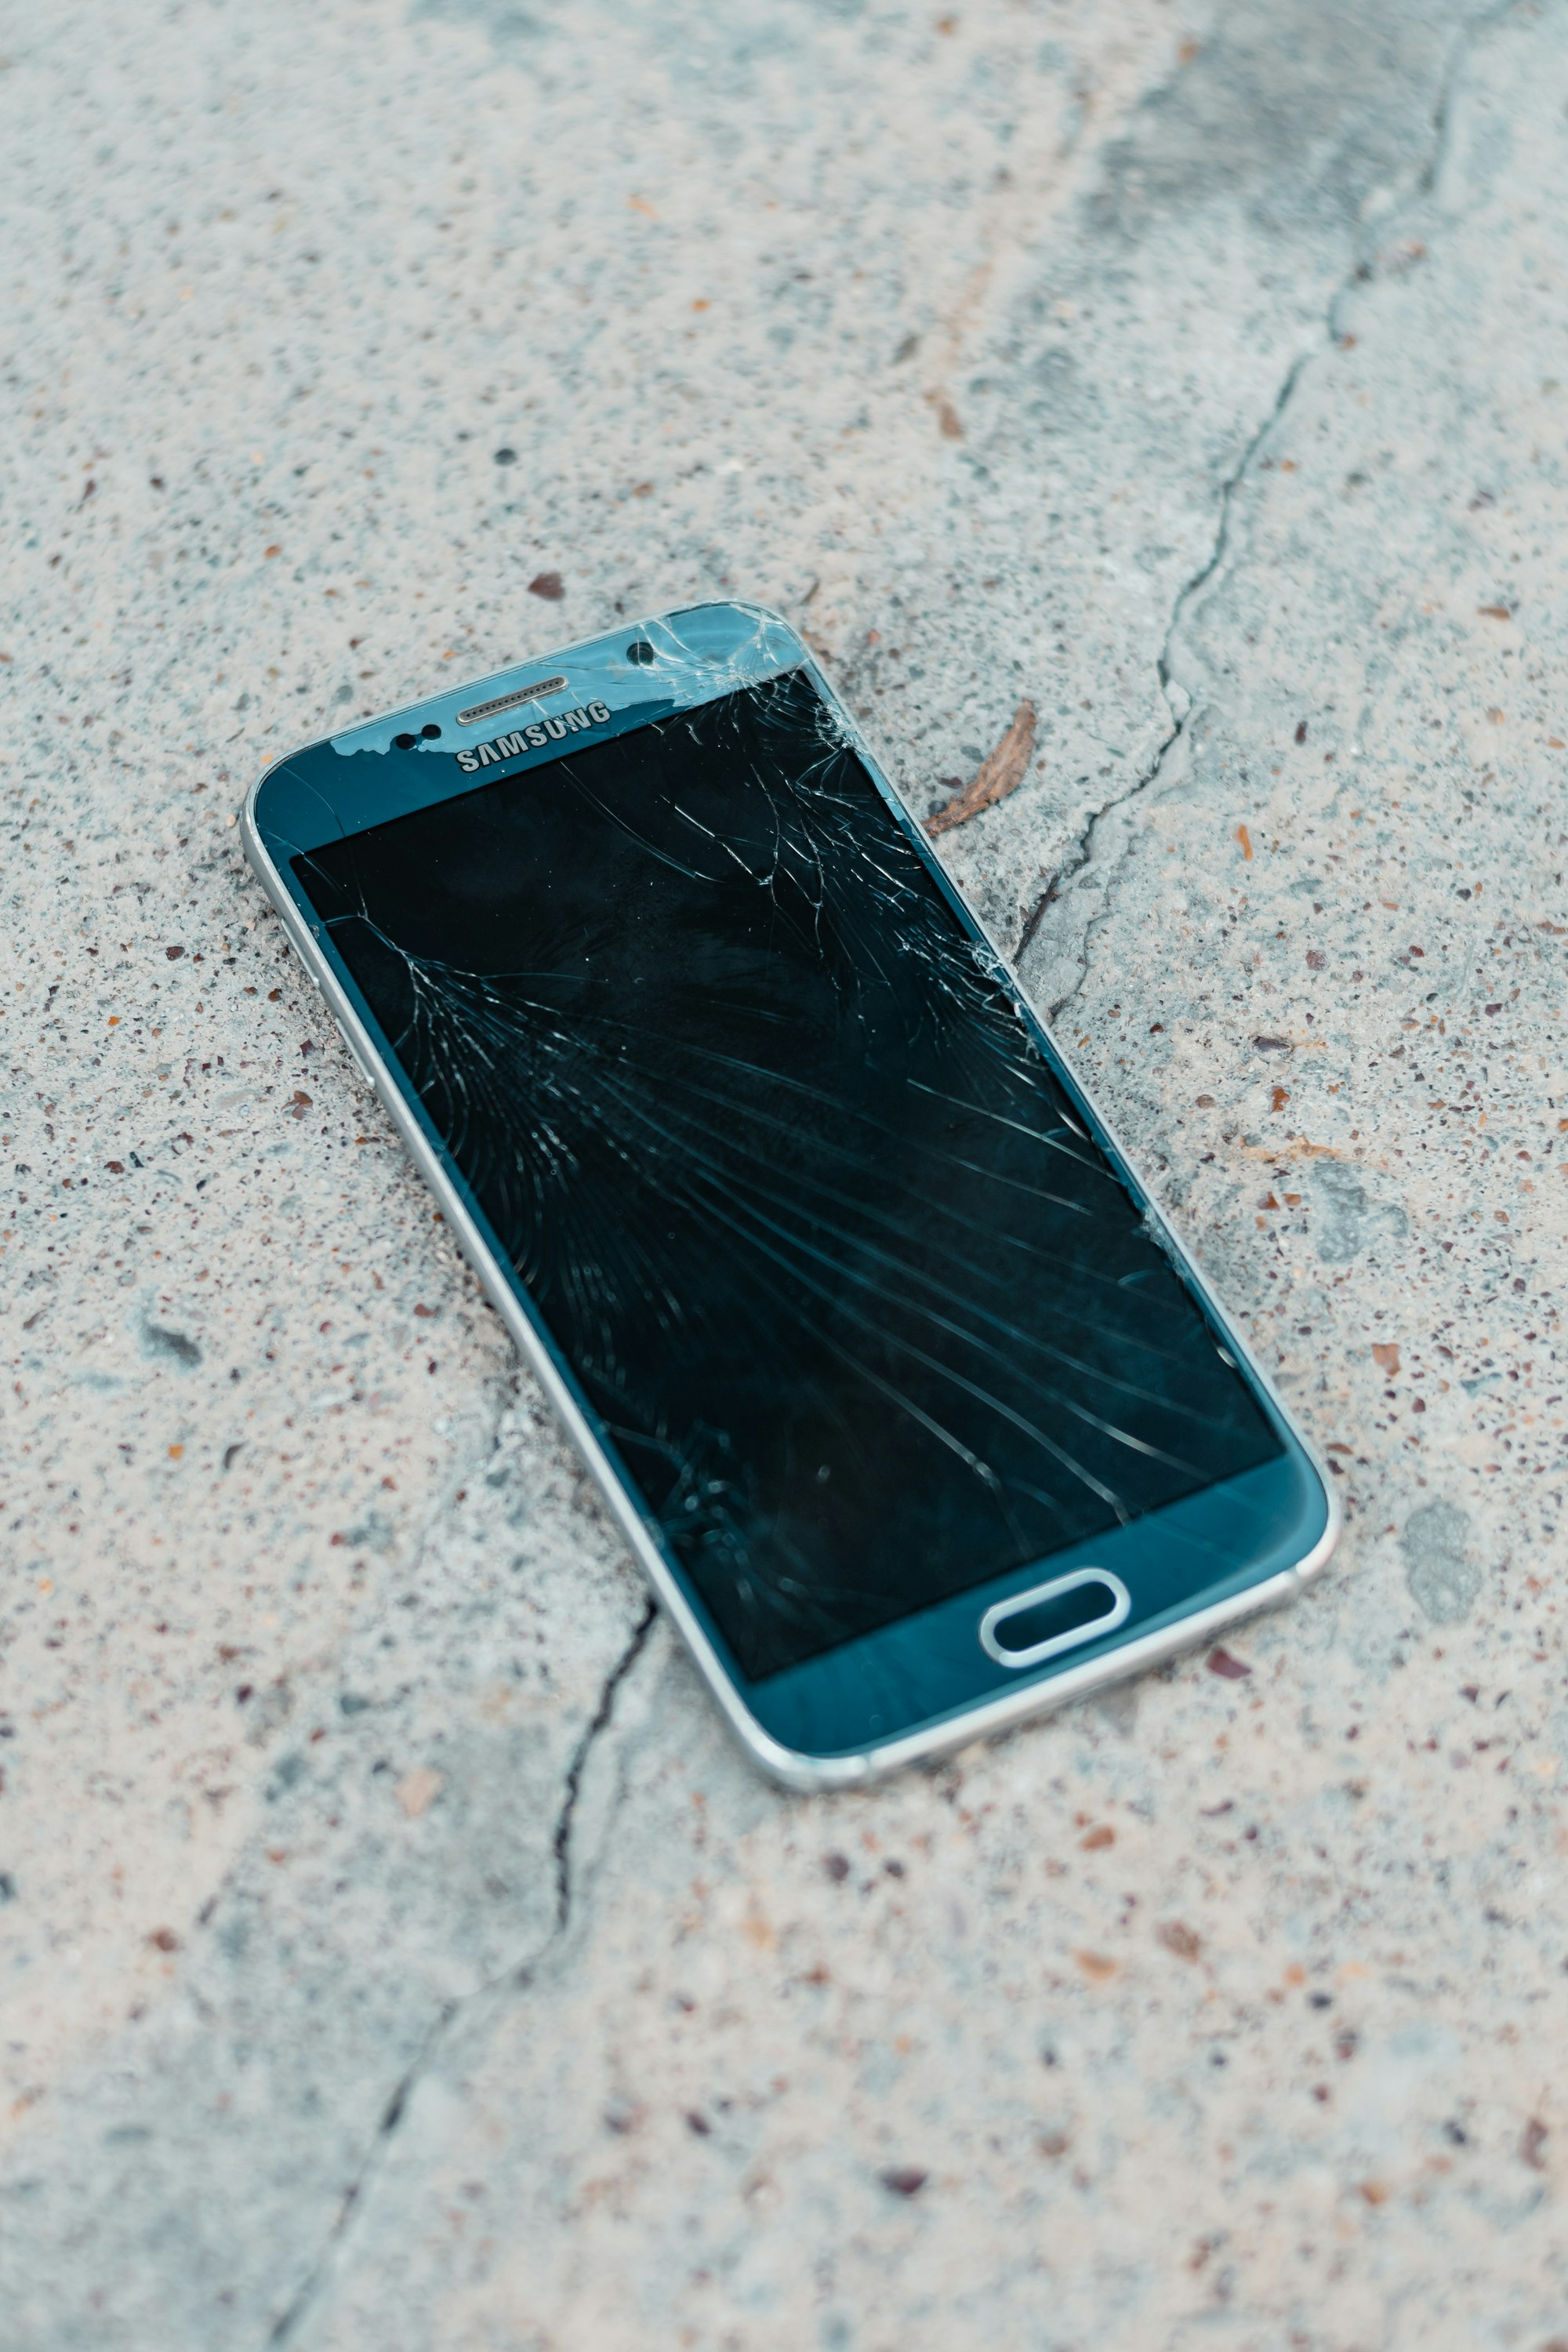 Samsung Galaxy S6 with shattered screen